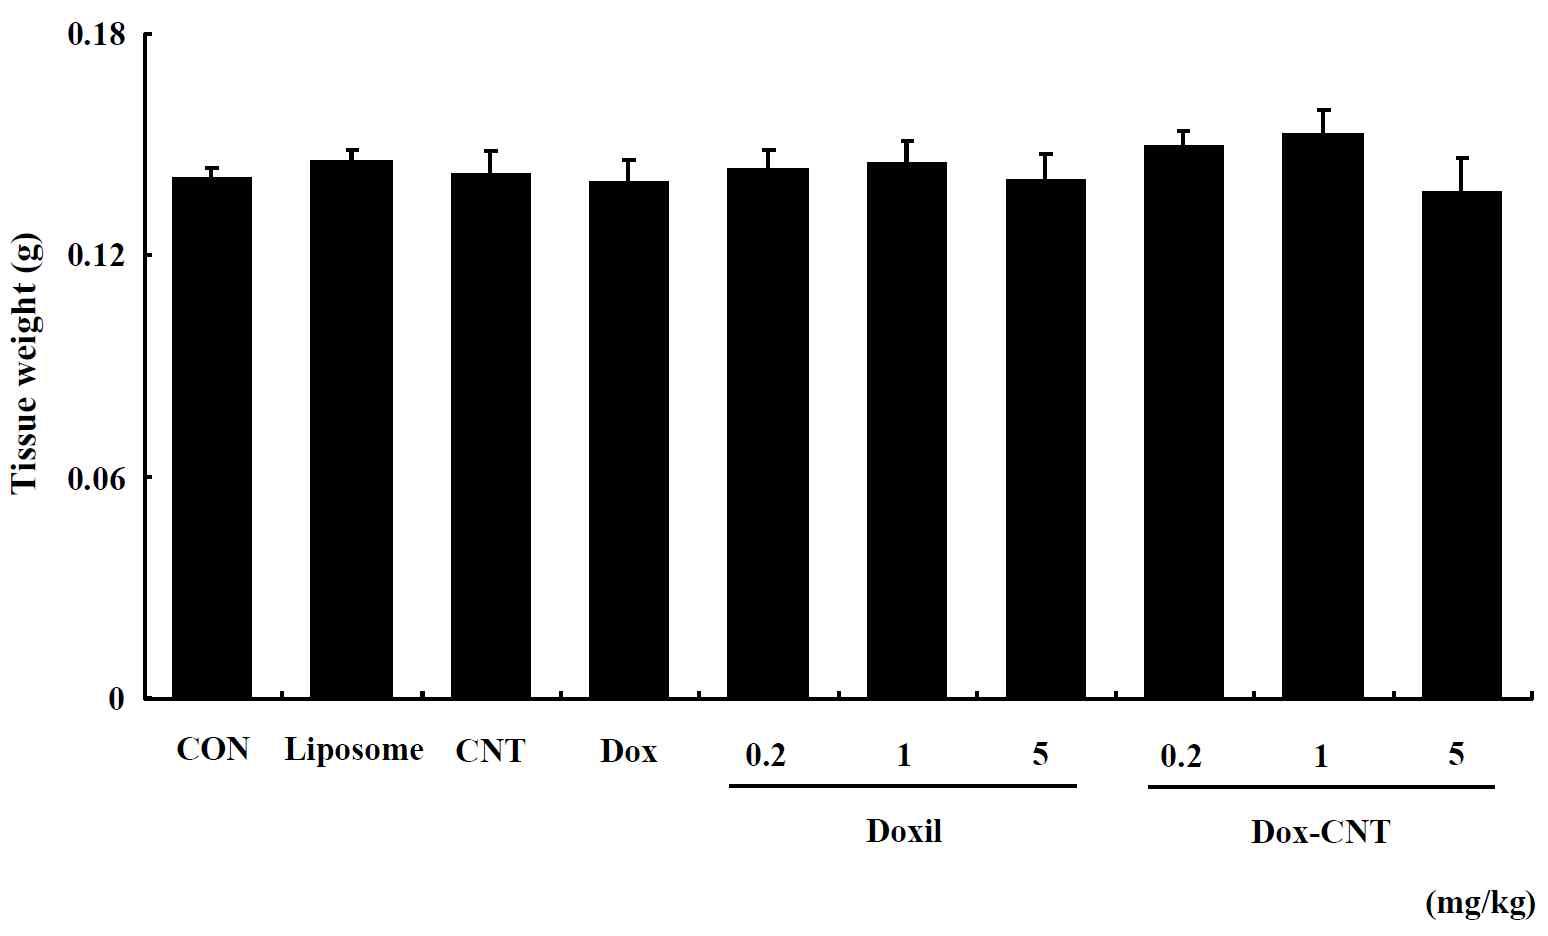 The change of heart weight in single exposed male ICR mice for 14 days. Mice were respectively administered by intravenous injection with liposome, CNT, Dox, Doxil (0.2, 1, 5 mg/kg) and Dox-CNT (0.2, 1, 5 mg/kg). The results are presented as mean ± SE (n = 10). * p < 0.05, significantly different from the control